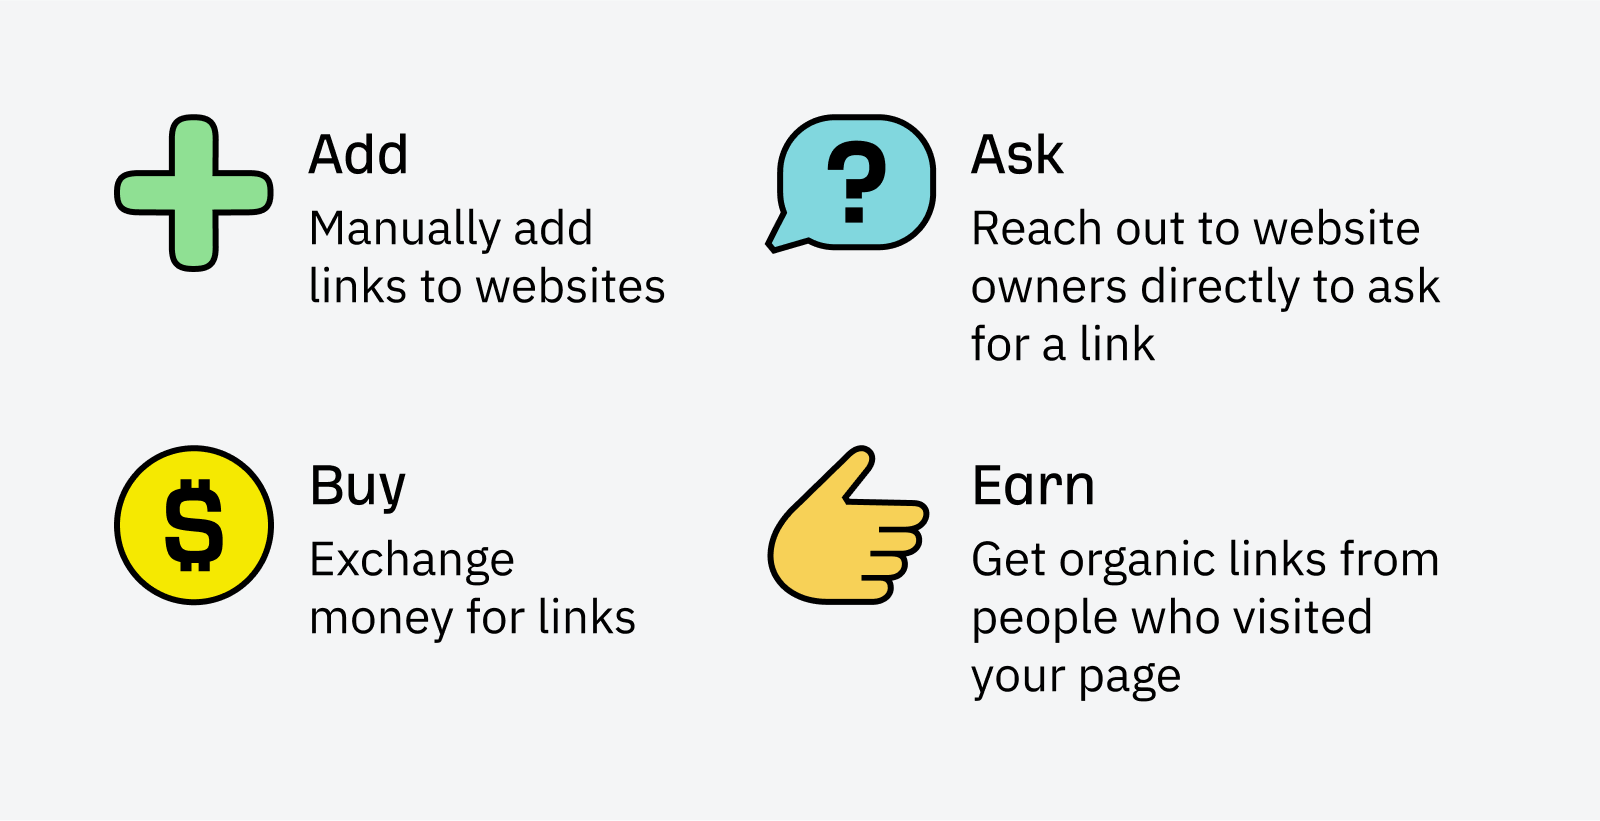 How To Build Links?